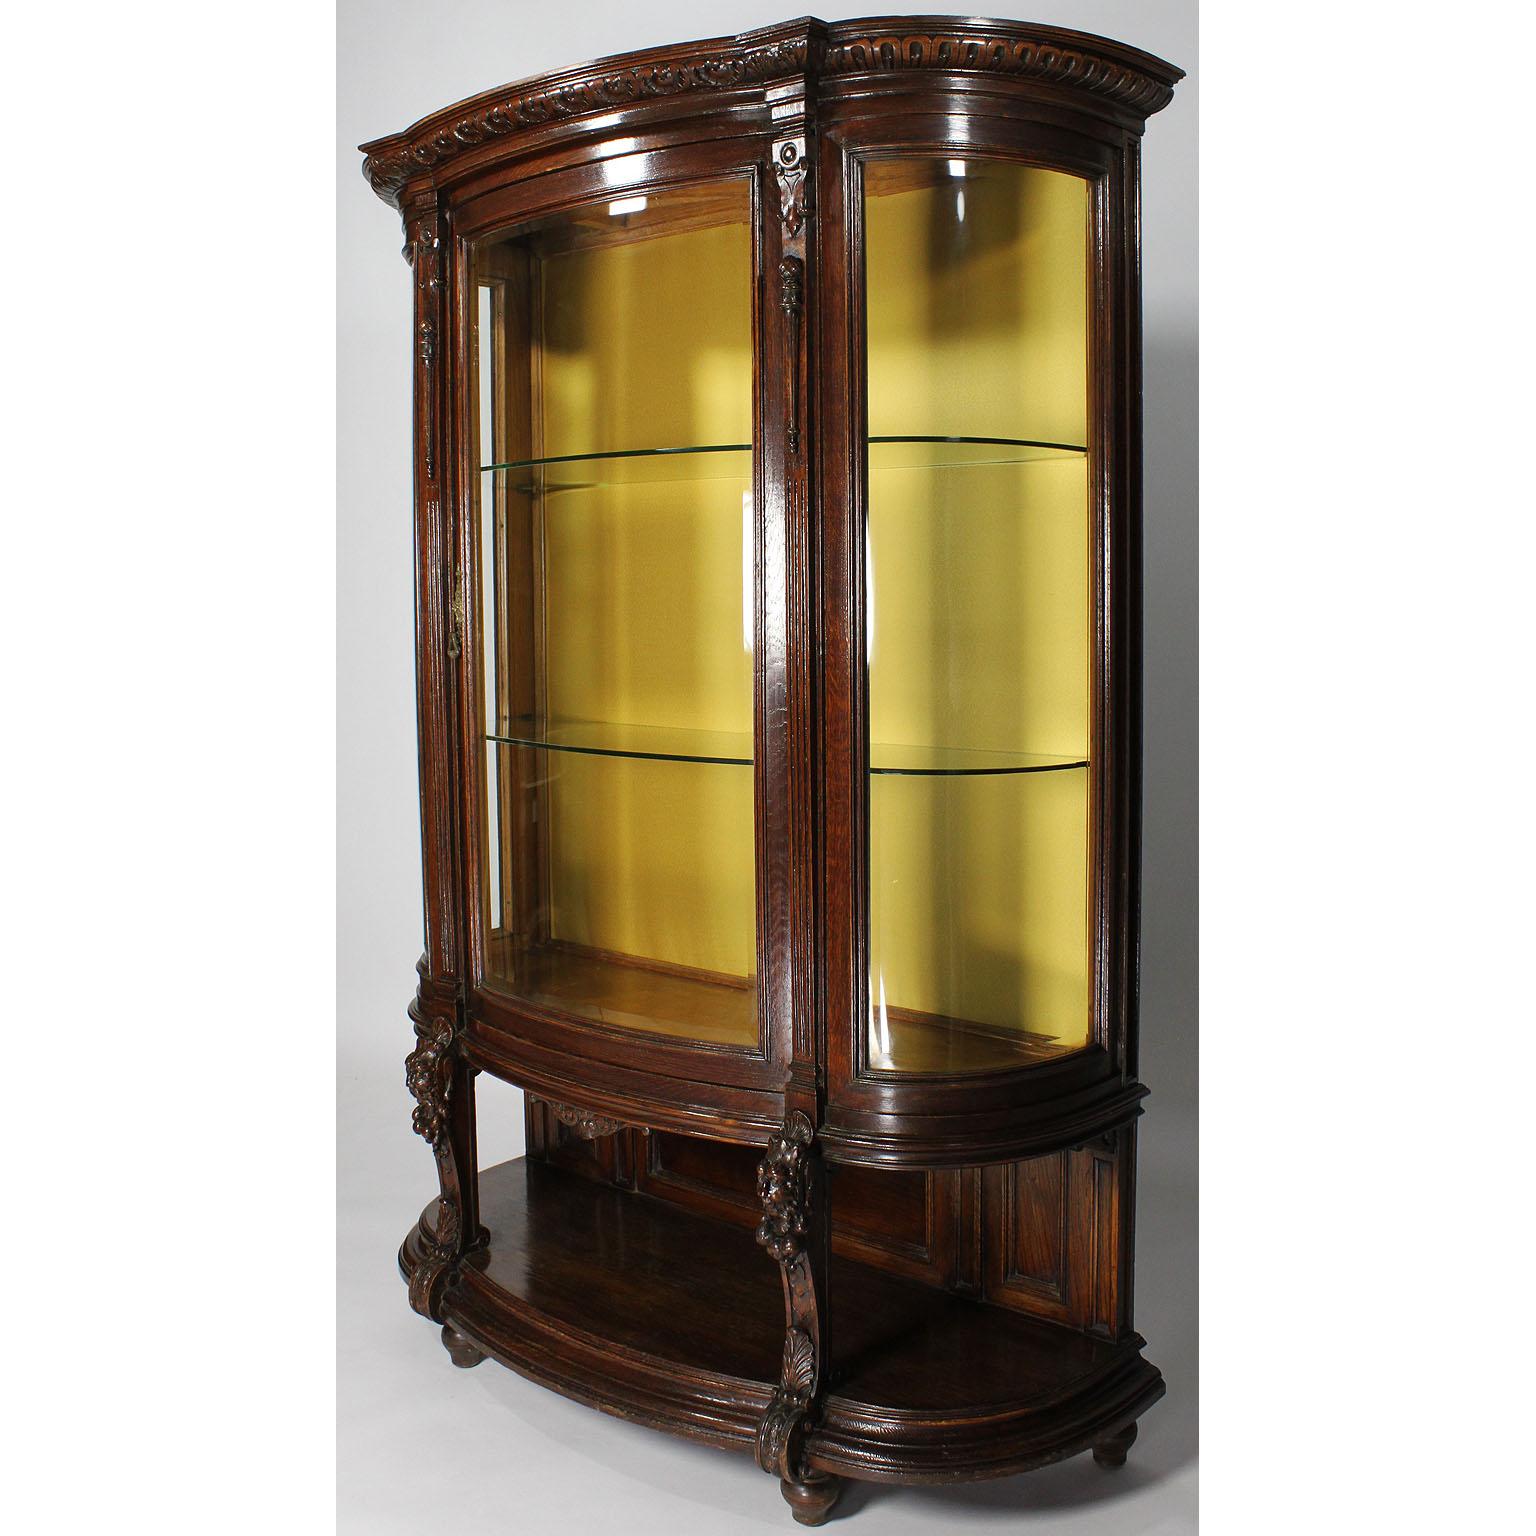 A French 19th-20th century Baroque Revival carved oak Bombé figural vitrine. The single front-door display cabinet with bowed front and side beveled glass panels, with two interior glass shelves and raised on carved front legs with figures of